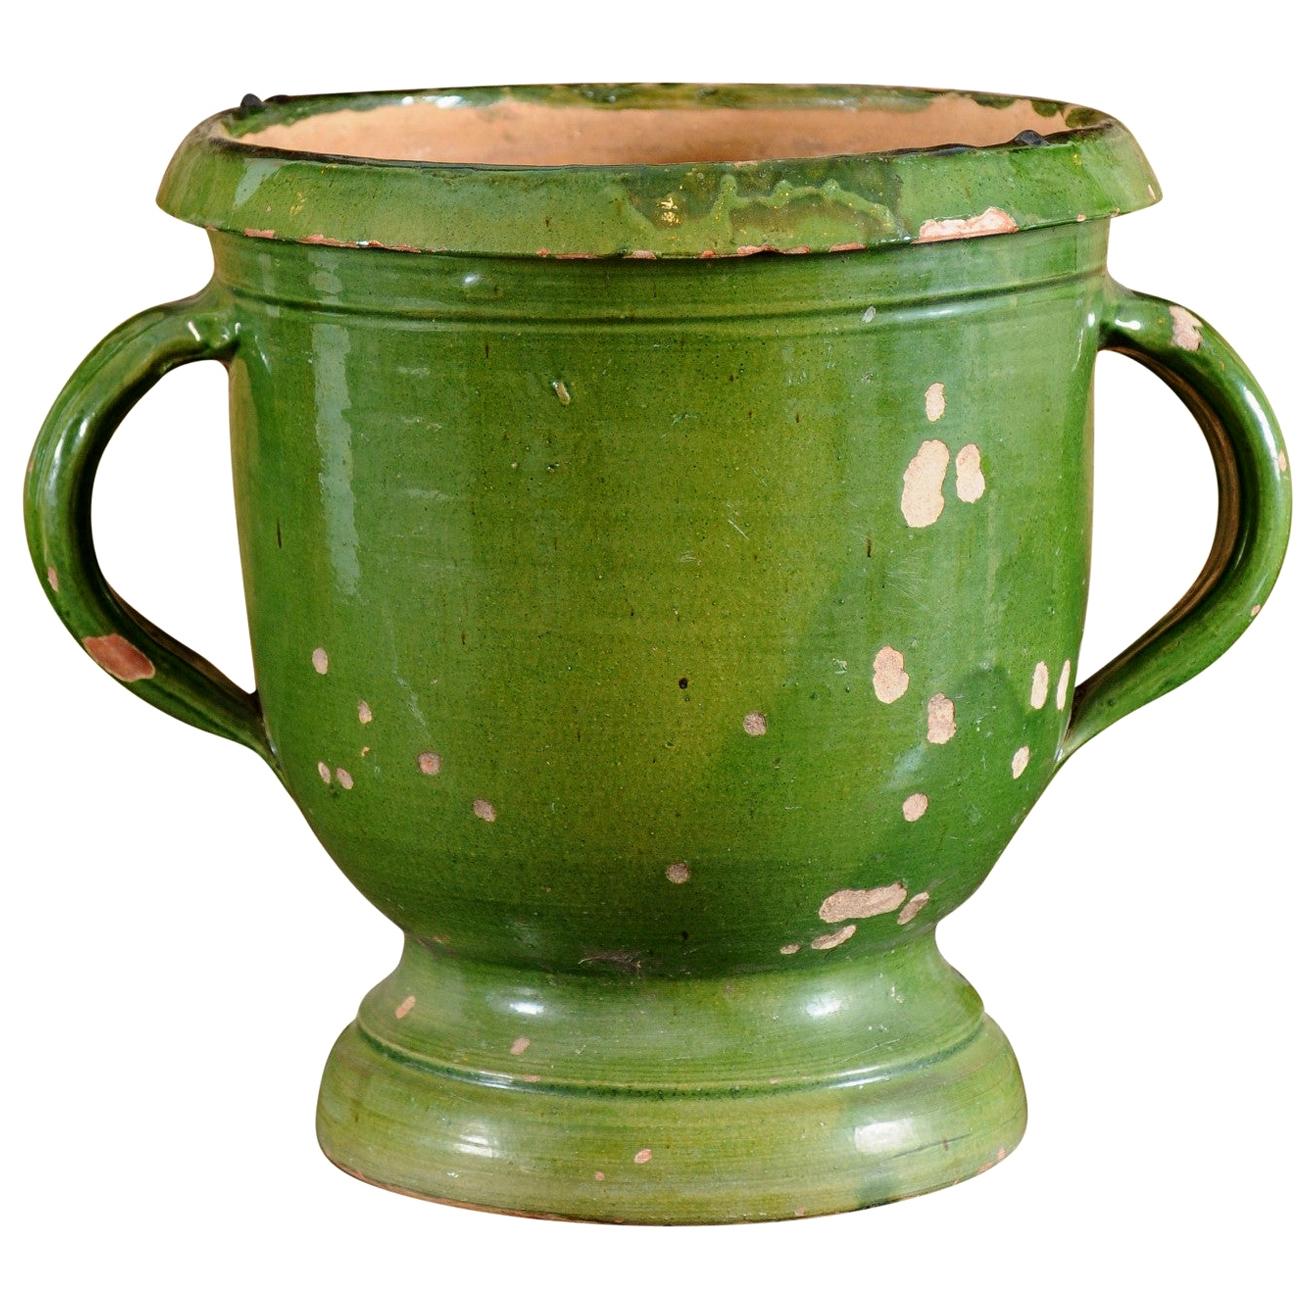 French Provincial 1850s Green Glazed Pottery Jardinière with Distressed Patina